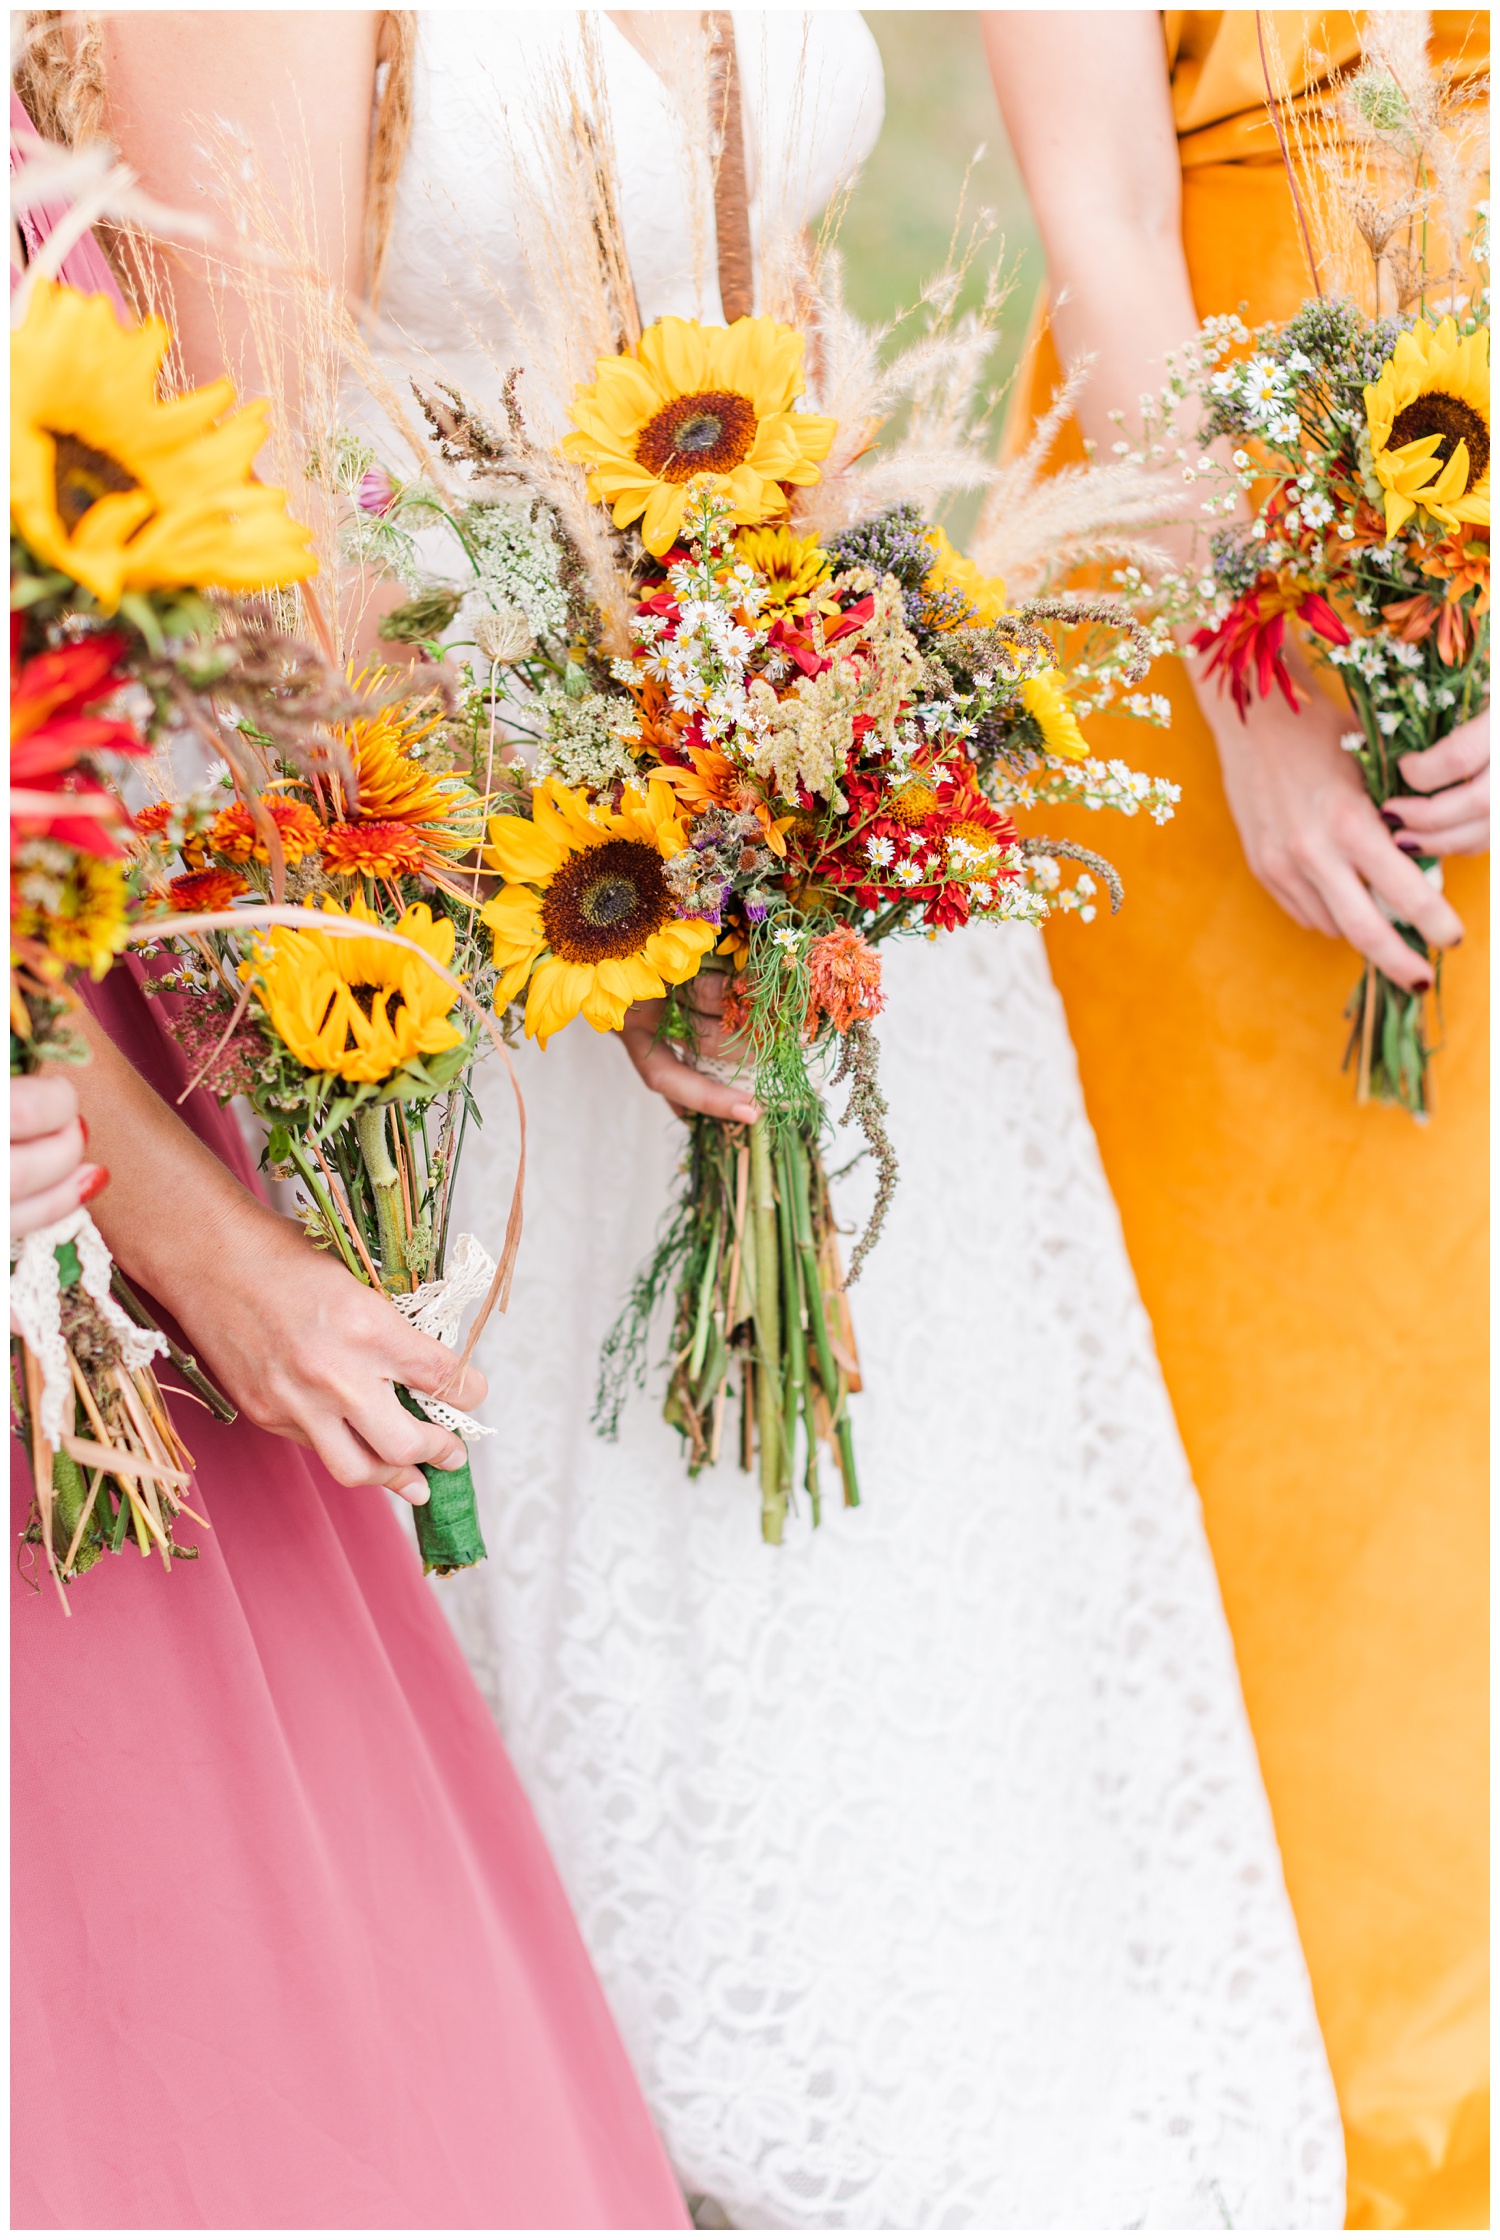 Fresh picked wildflower wedding bouquet featuring sunflowers, mums, cattail, Queen Anne's lace and pampas grass | CB Studio